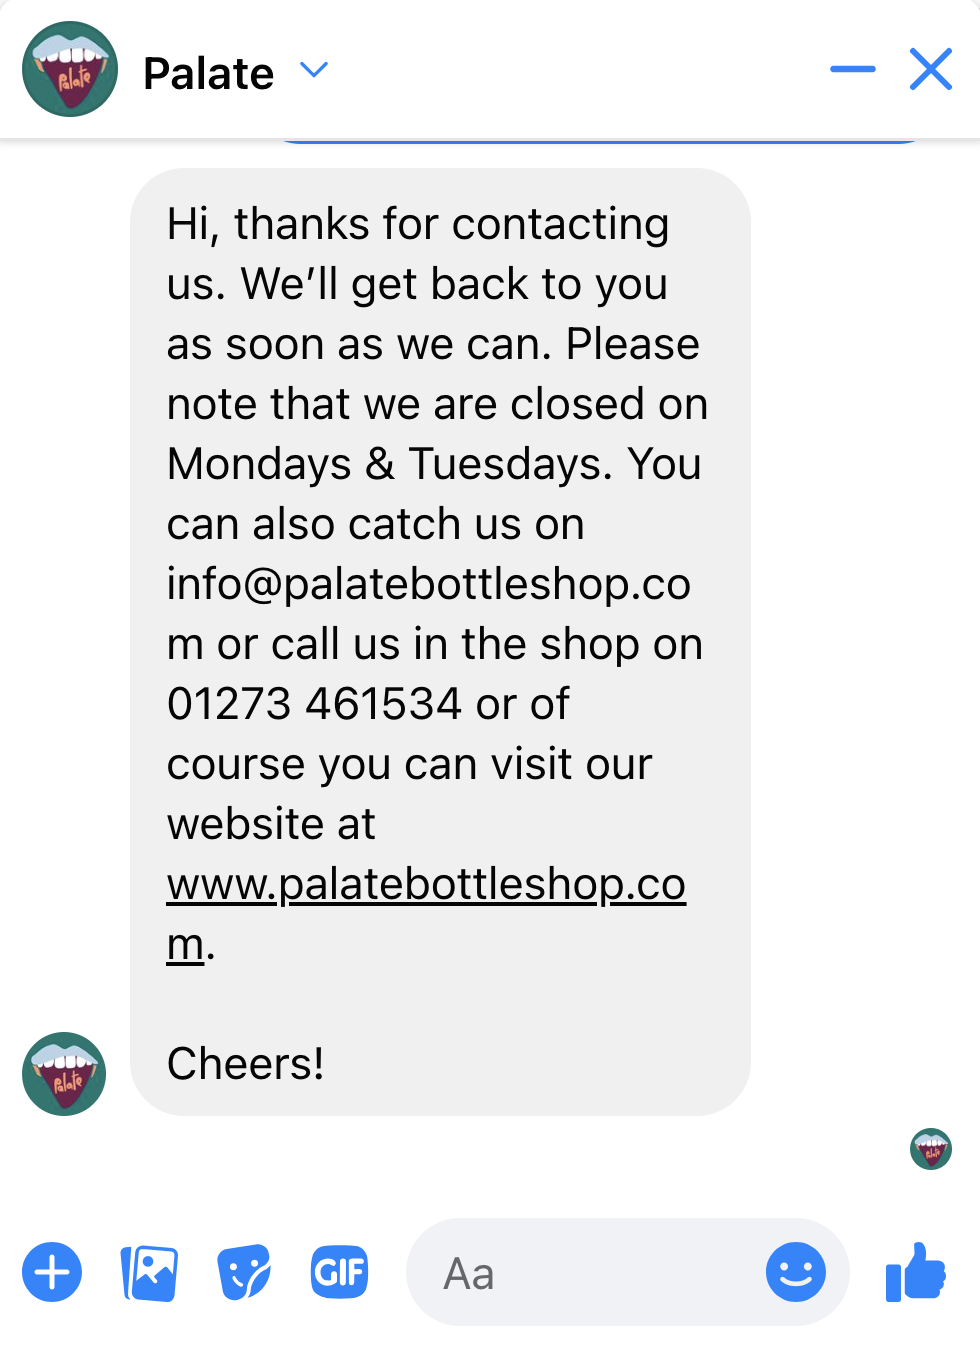 Palate's automated reply   to customers connected  Facebook Messenger